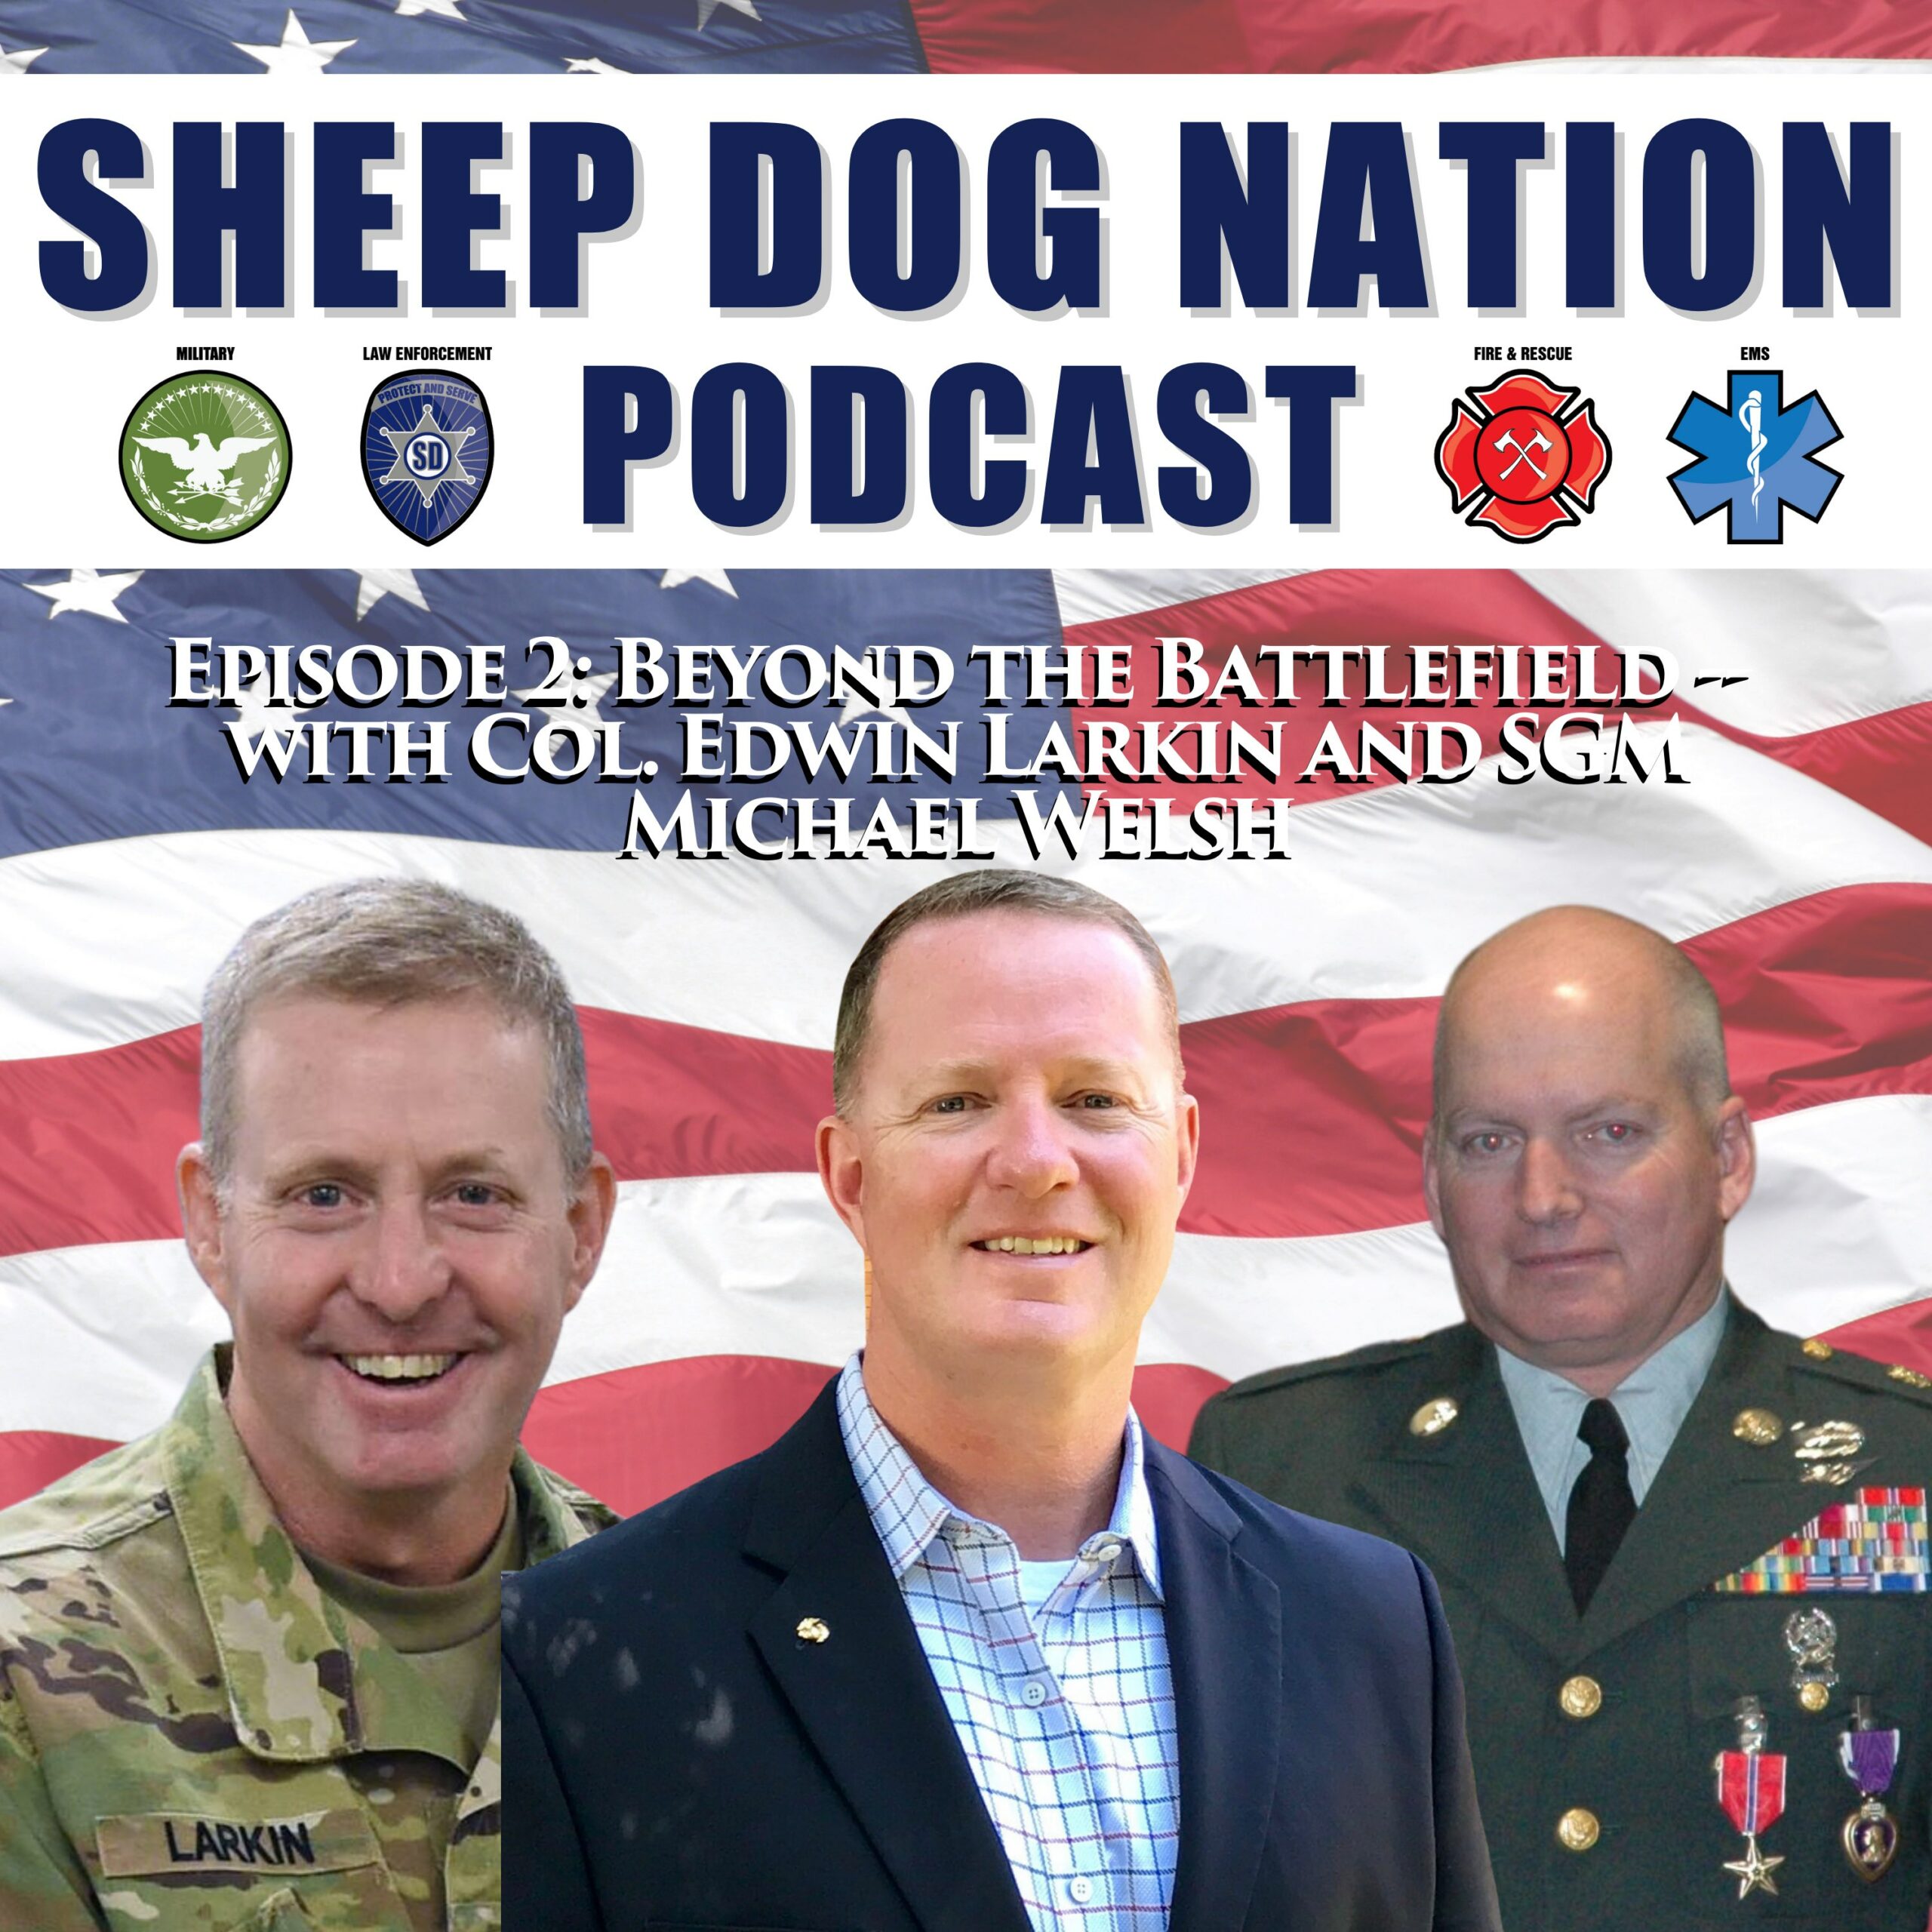 Episode 2 of The Sheep Dog Nation Podcast is Out Now!